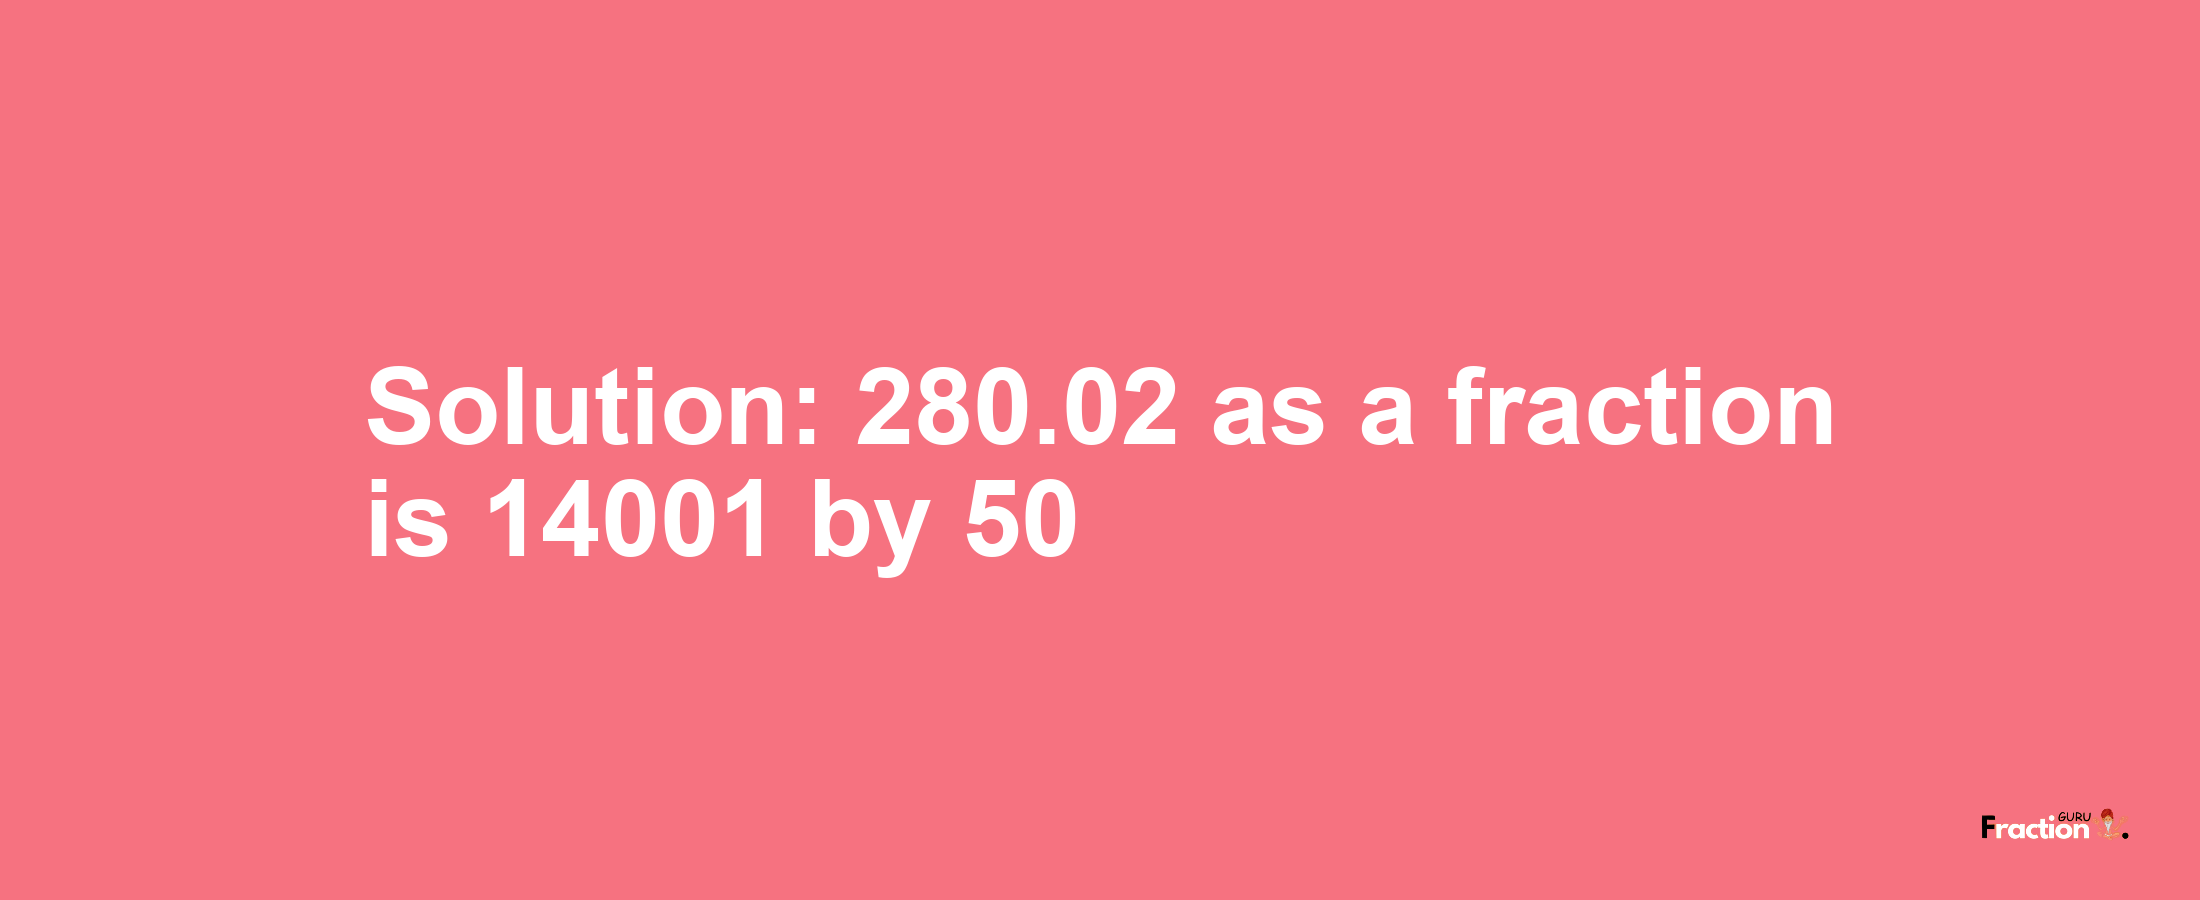 Solution:280.02 as a fraction is 14001/50